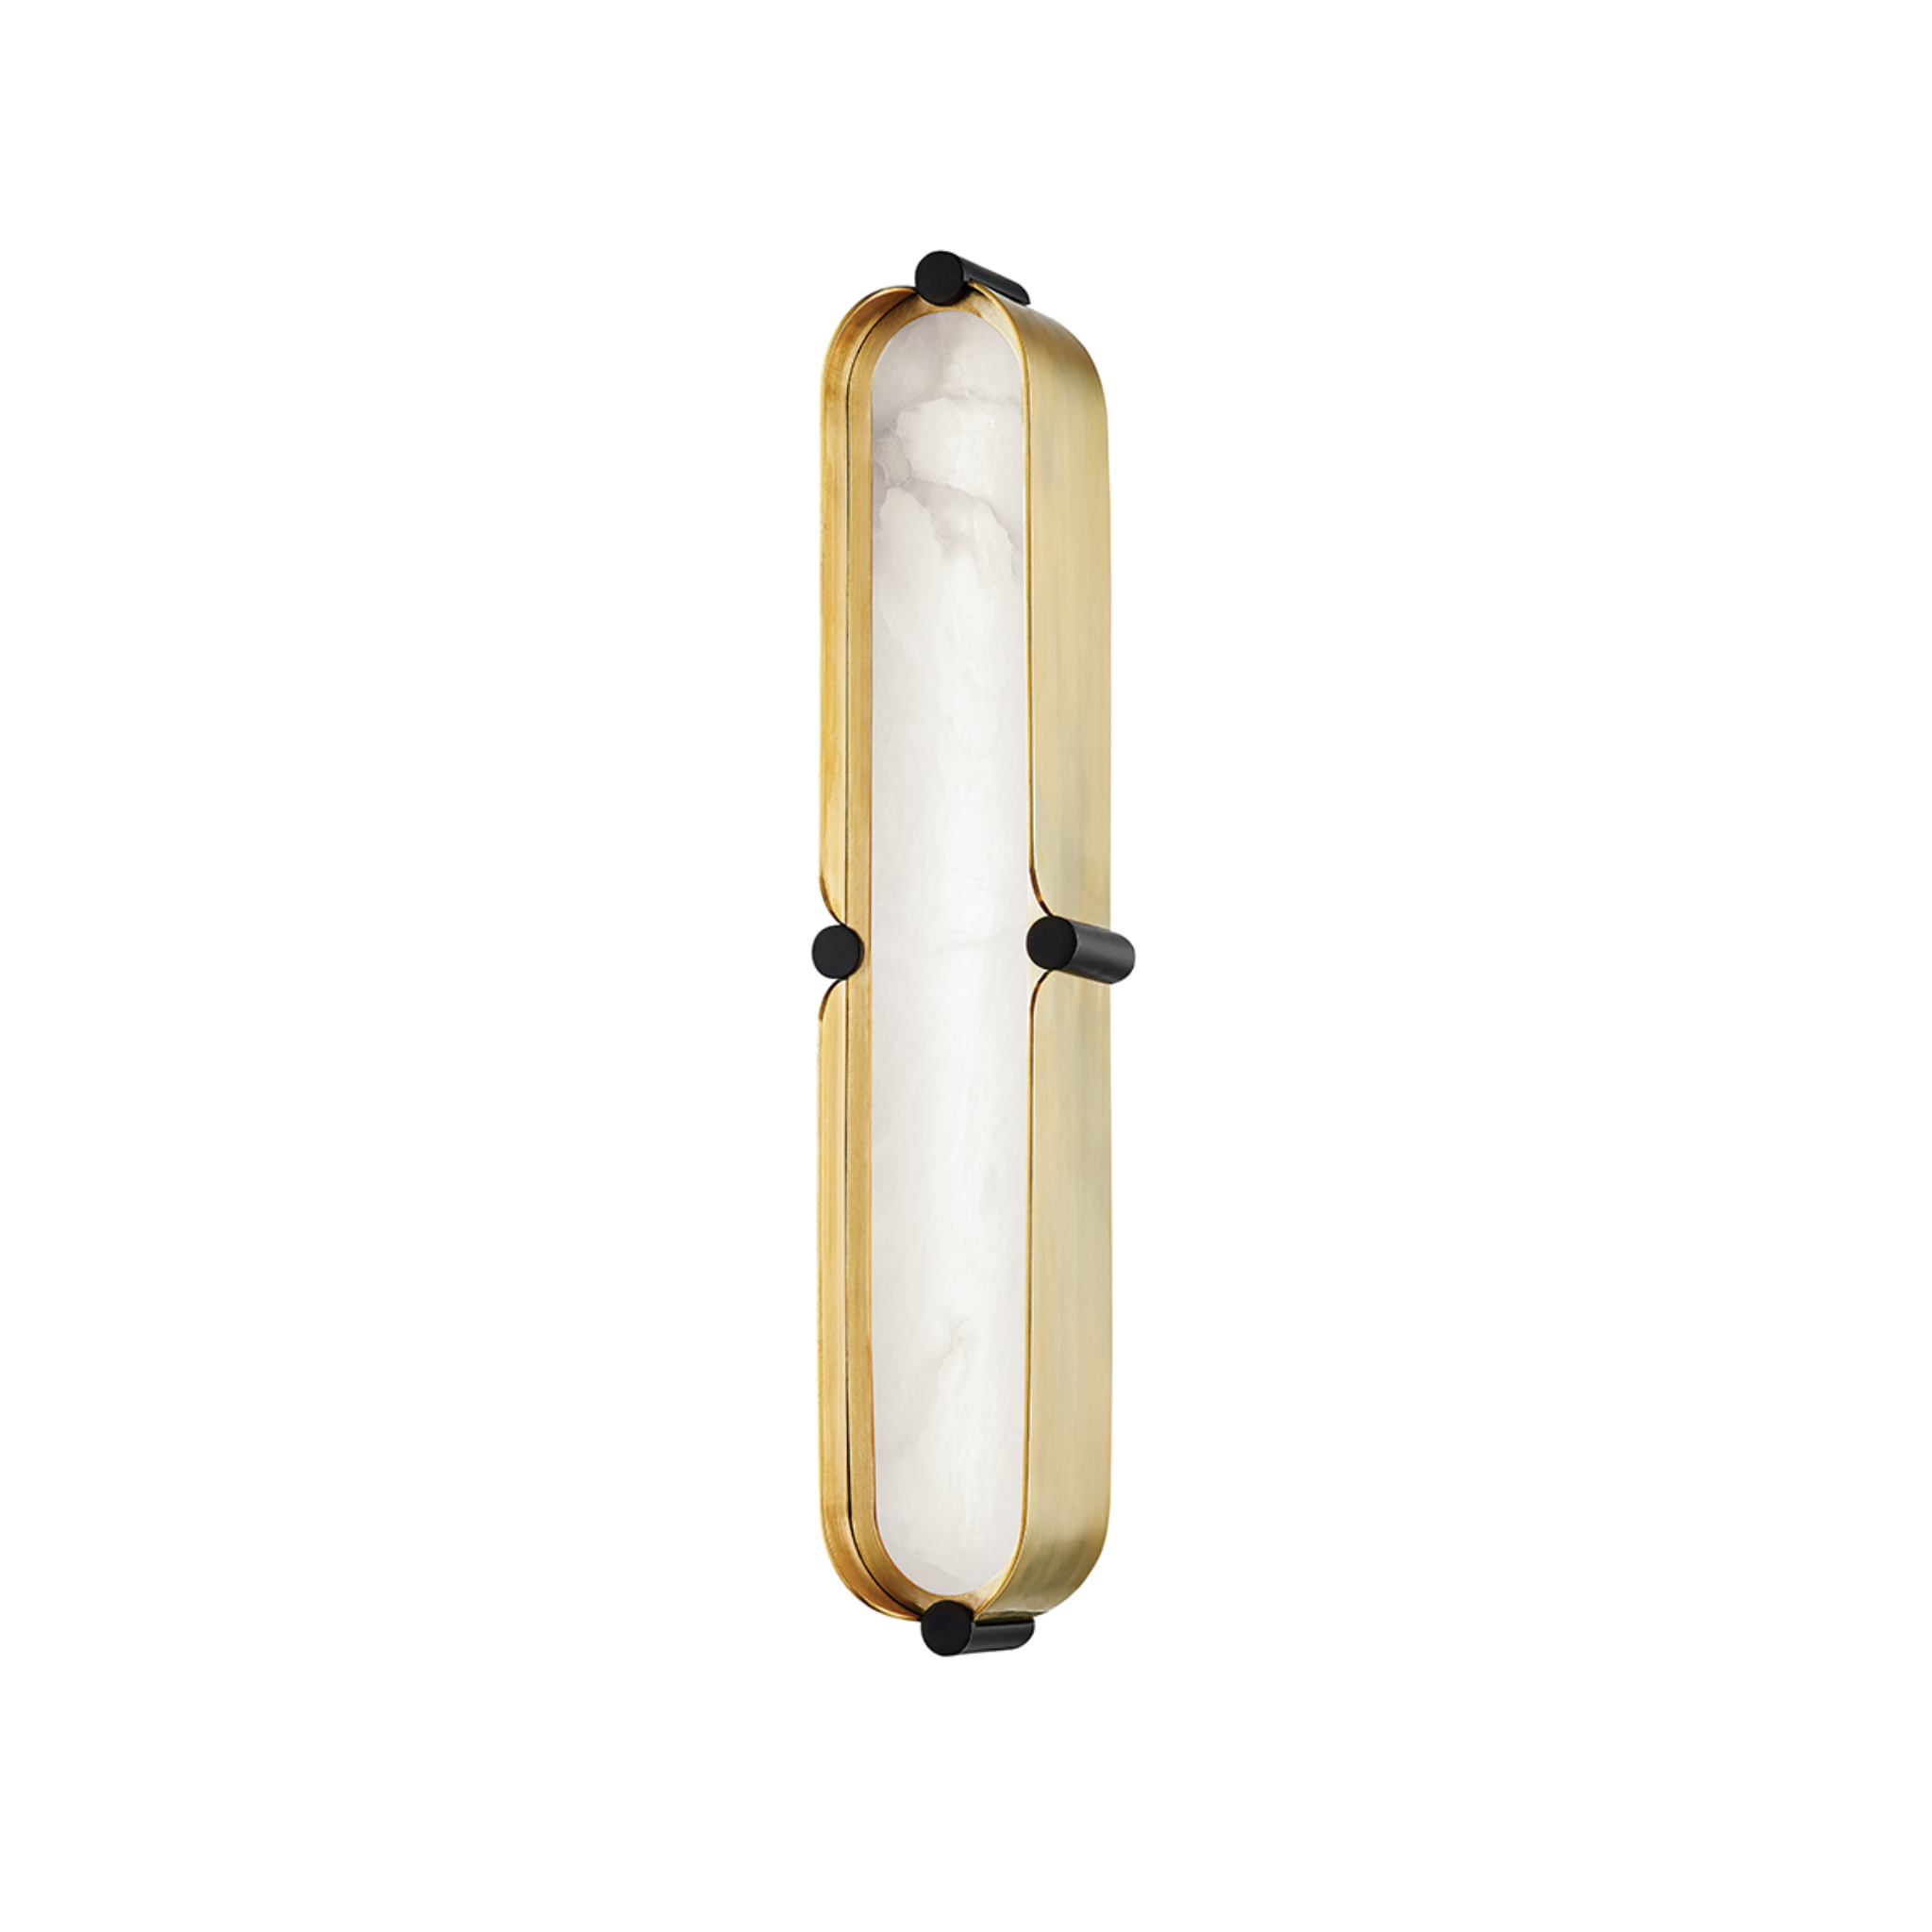 Tribeca Bath & Vanity Wall Sconce - 2916-AGB/BK-CE - Hudson Valley. - Luxury Lighting Boutique